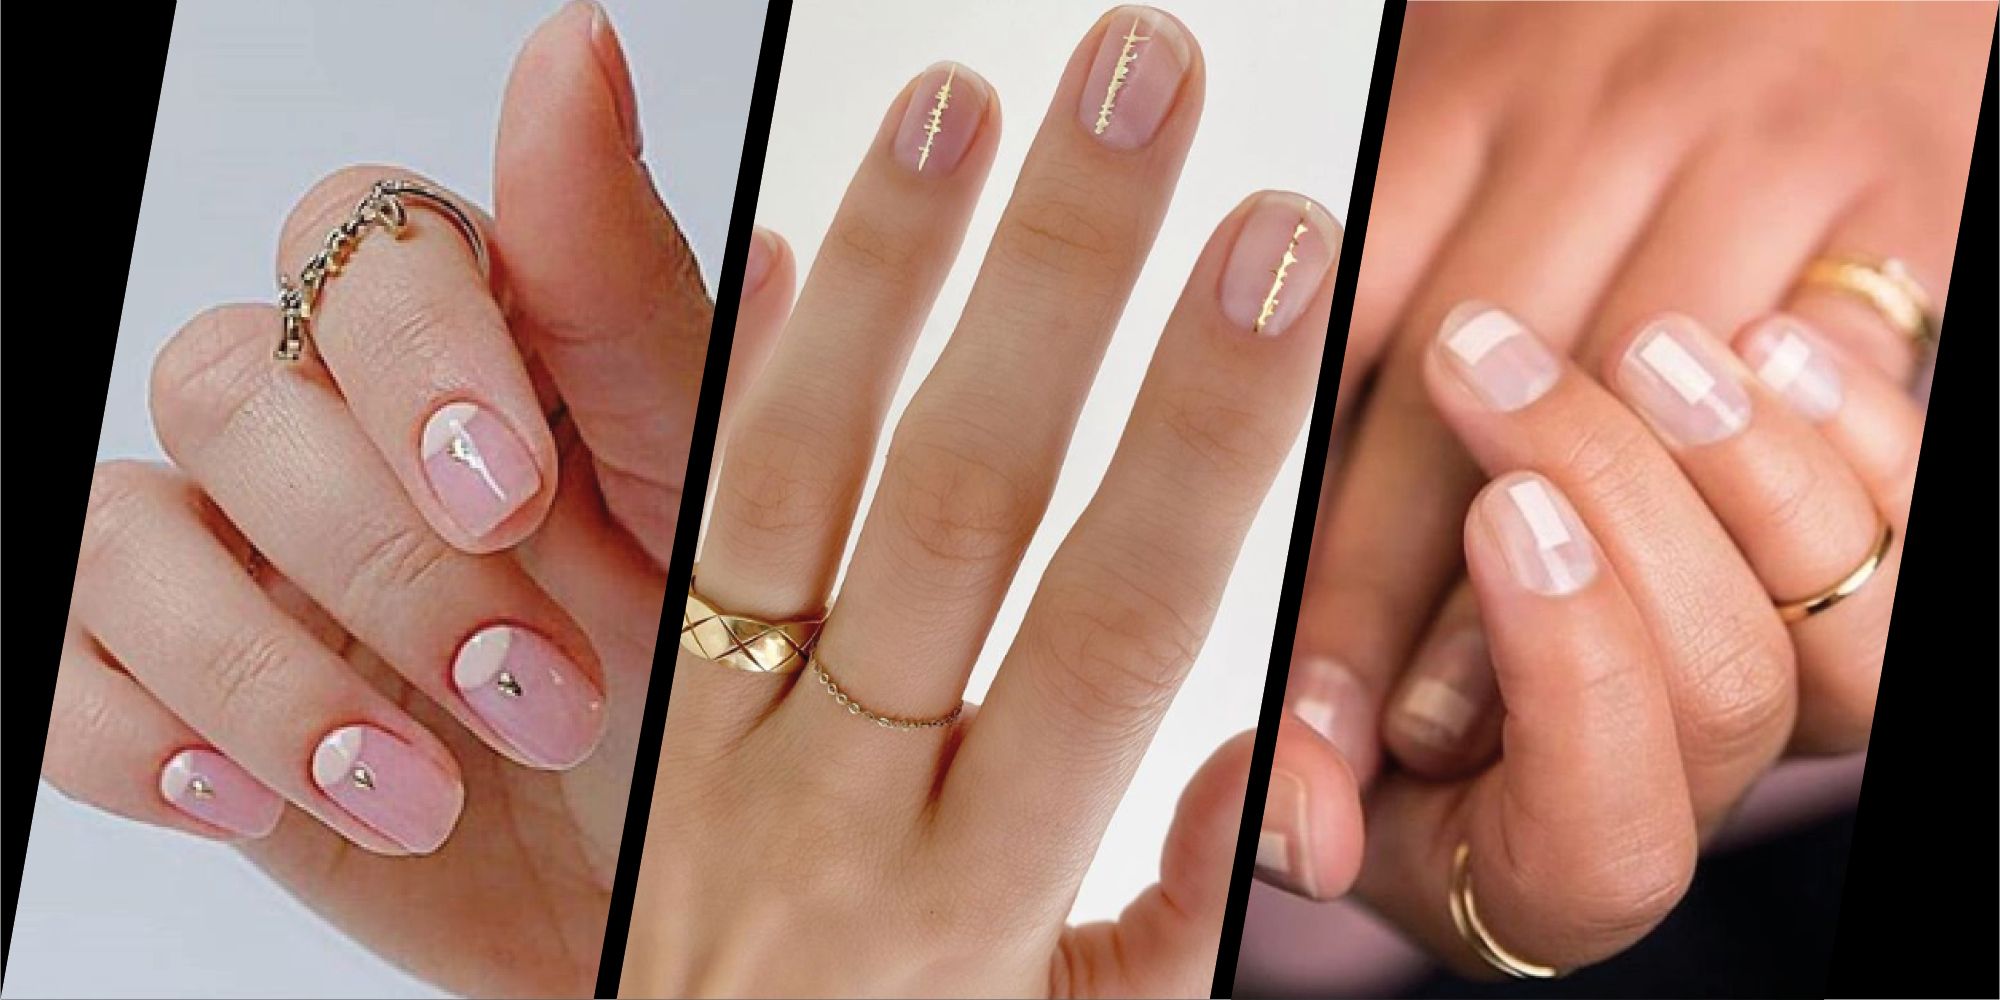 Understated nail art ideas - chic nail designs